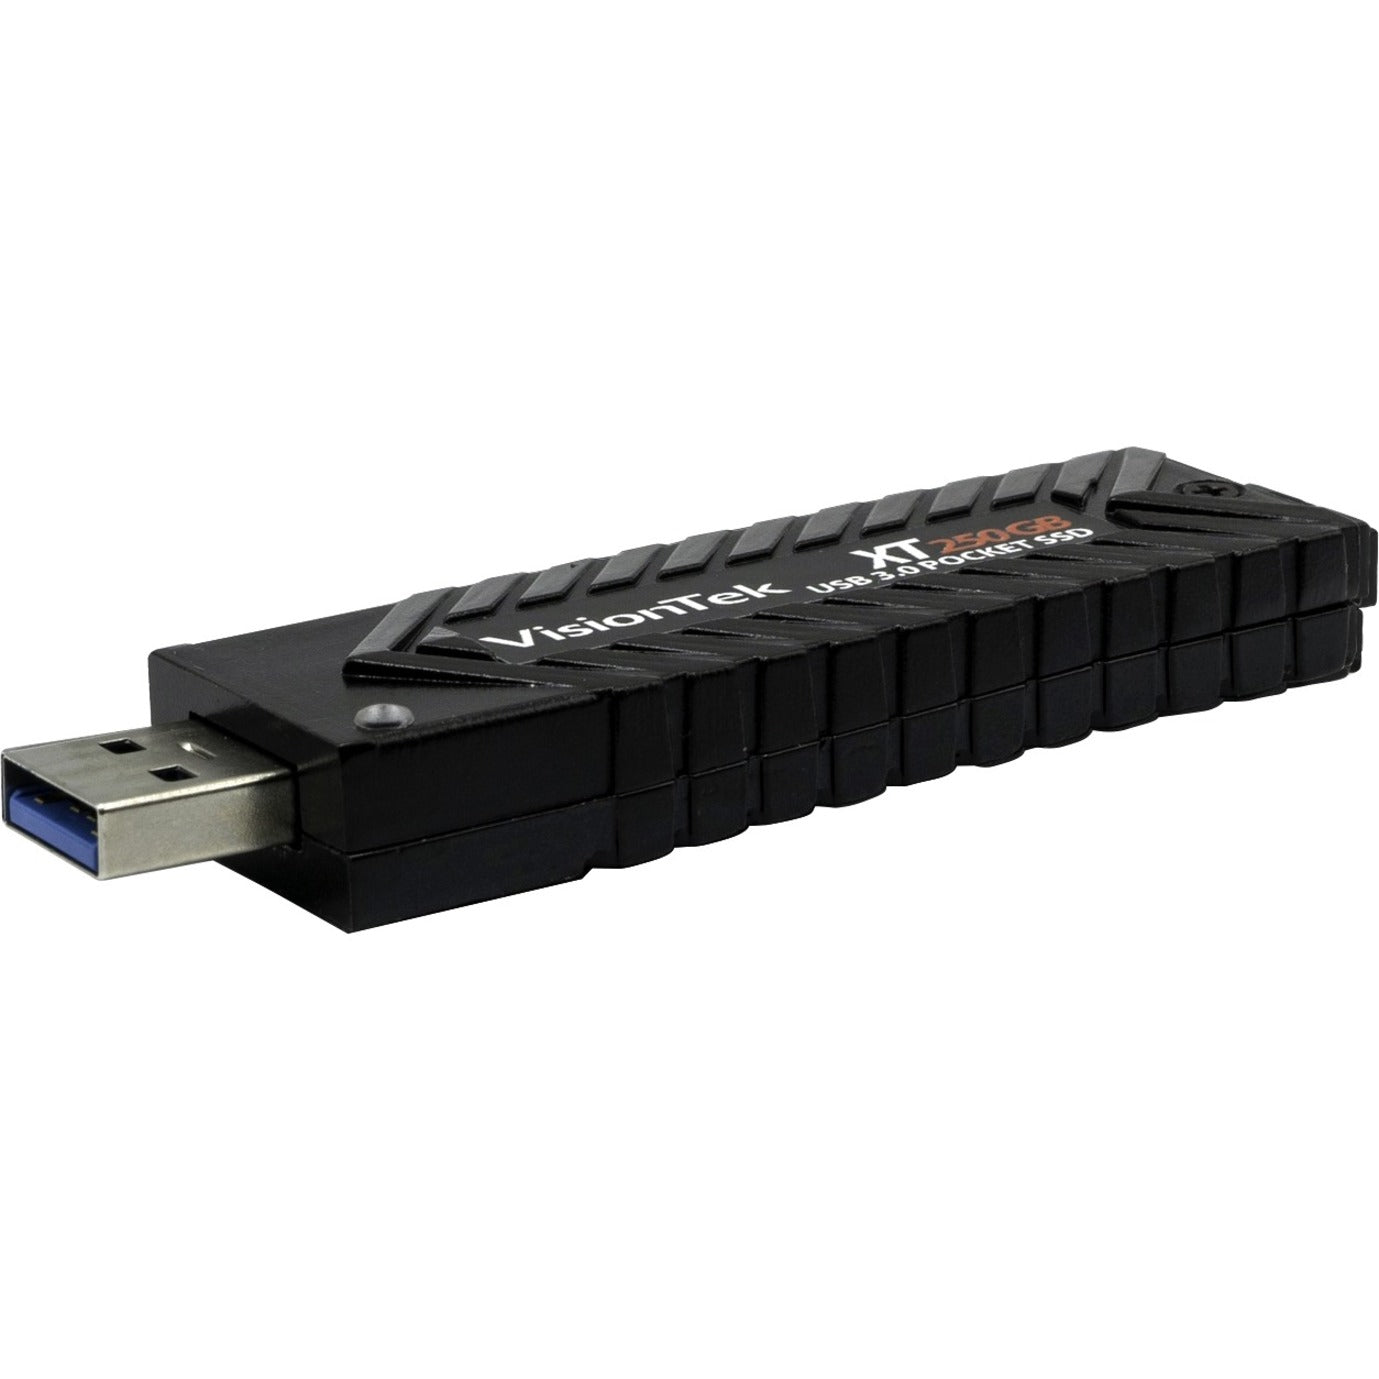 VisionTek 901239 250GB XT USB 3.0 Pocket SSD, 2 Year Limited Warranty, TAA Compliant, RoHS & WEEE Certified